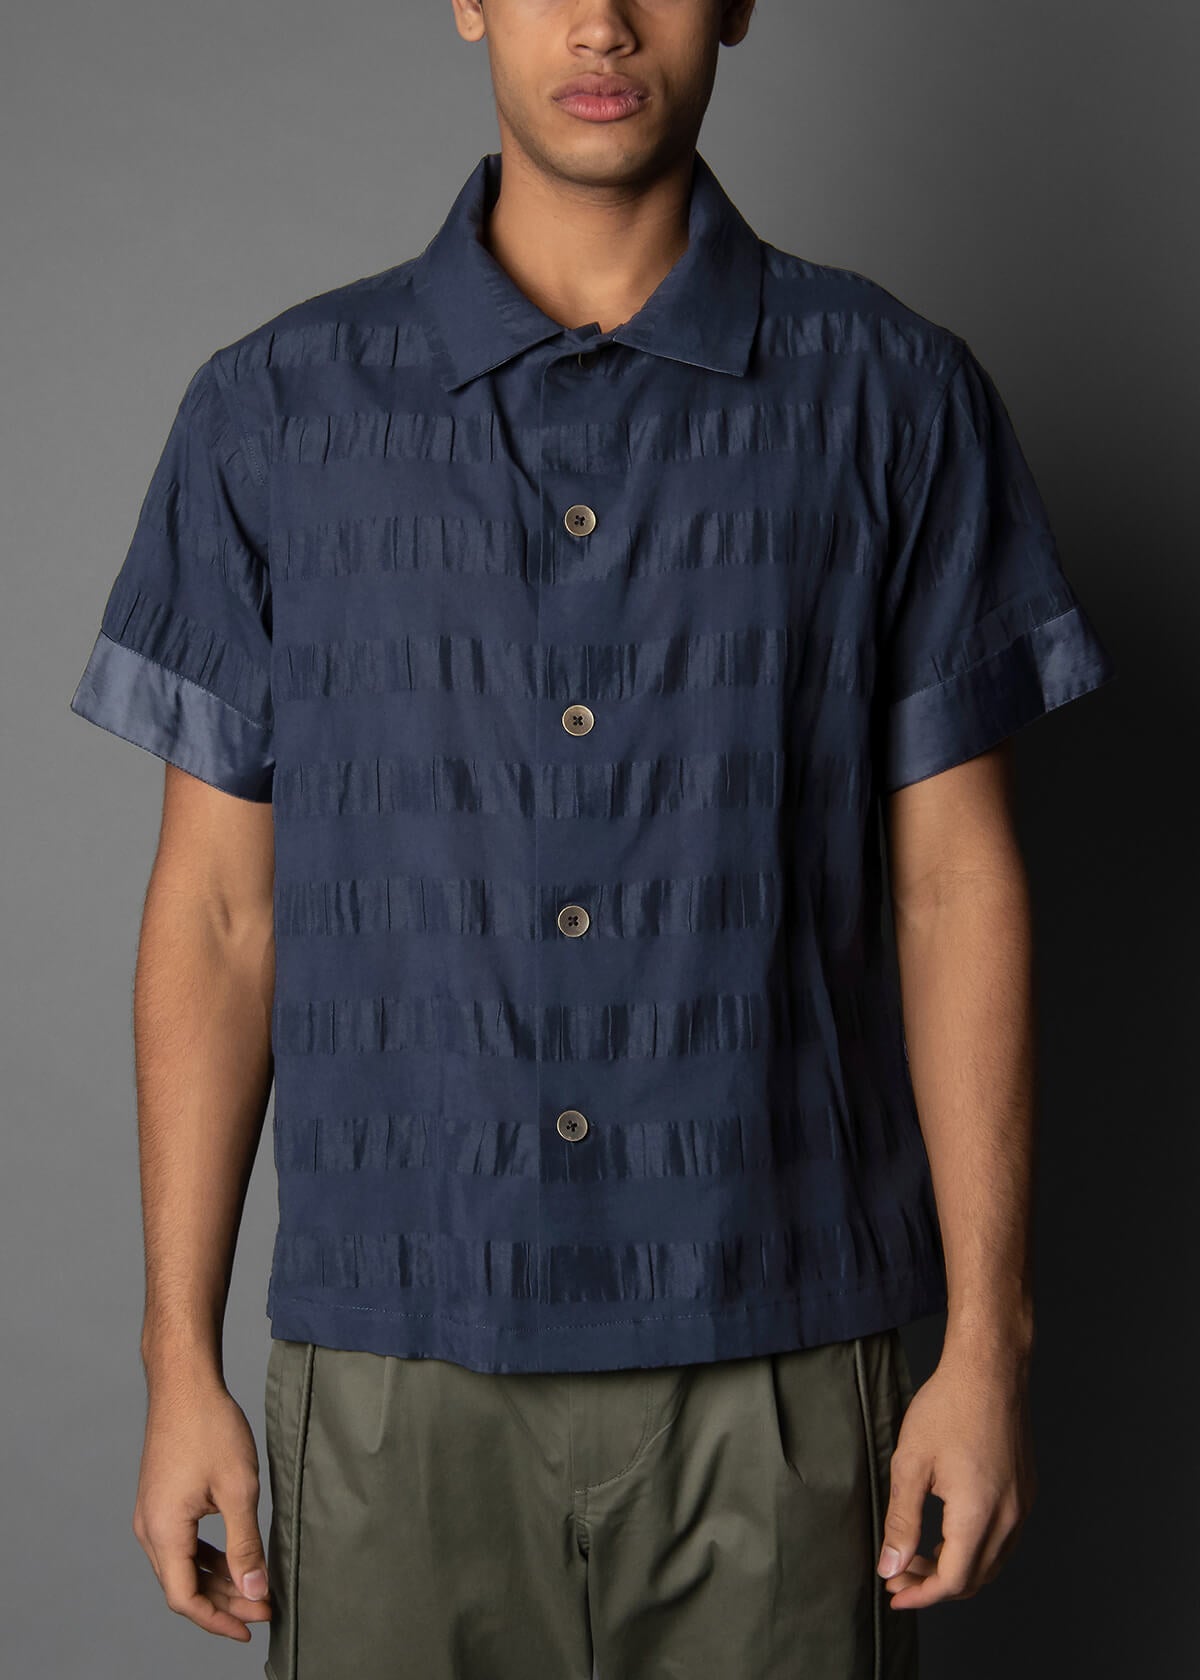 navy short sleeve mens shirt crafted from cotton and linen